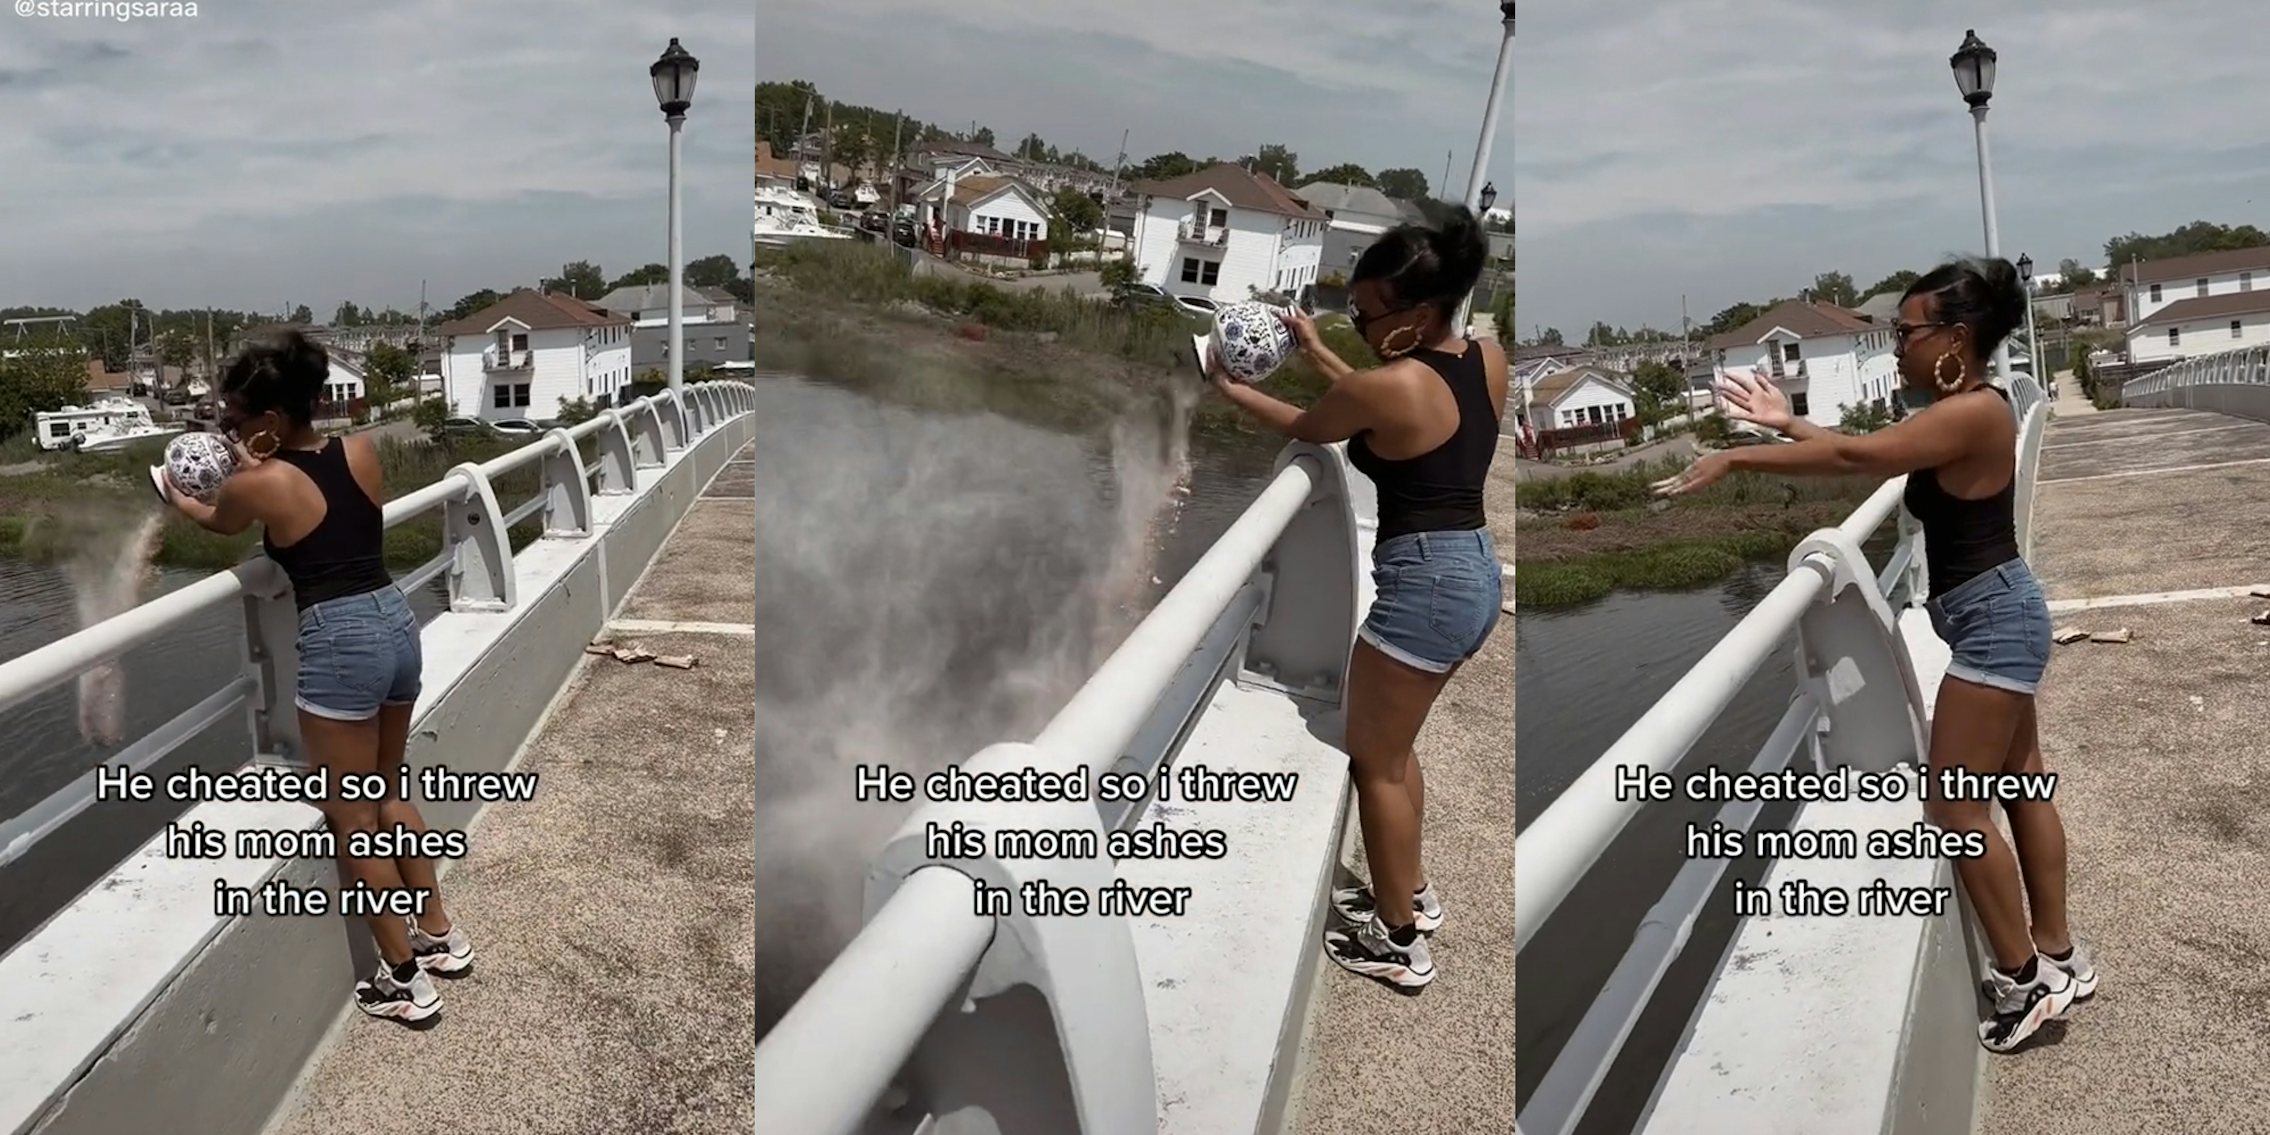 woman dumping ashes into a river from bridge with caption 'he cheated so i threw his mom ashes in the river'